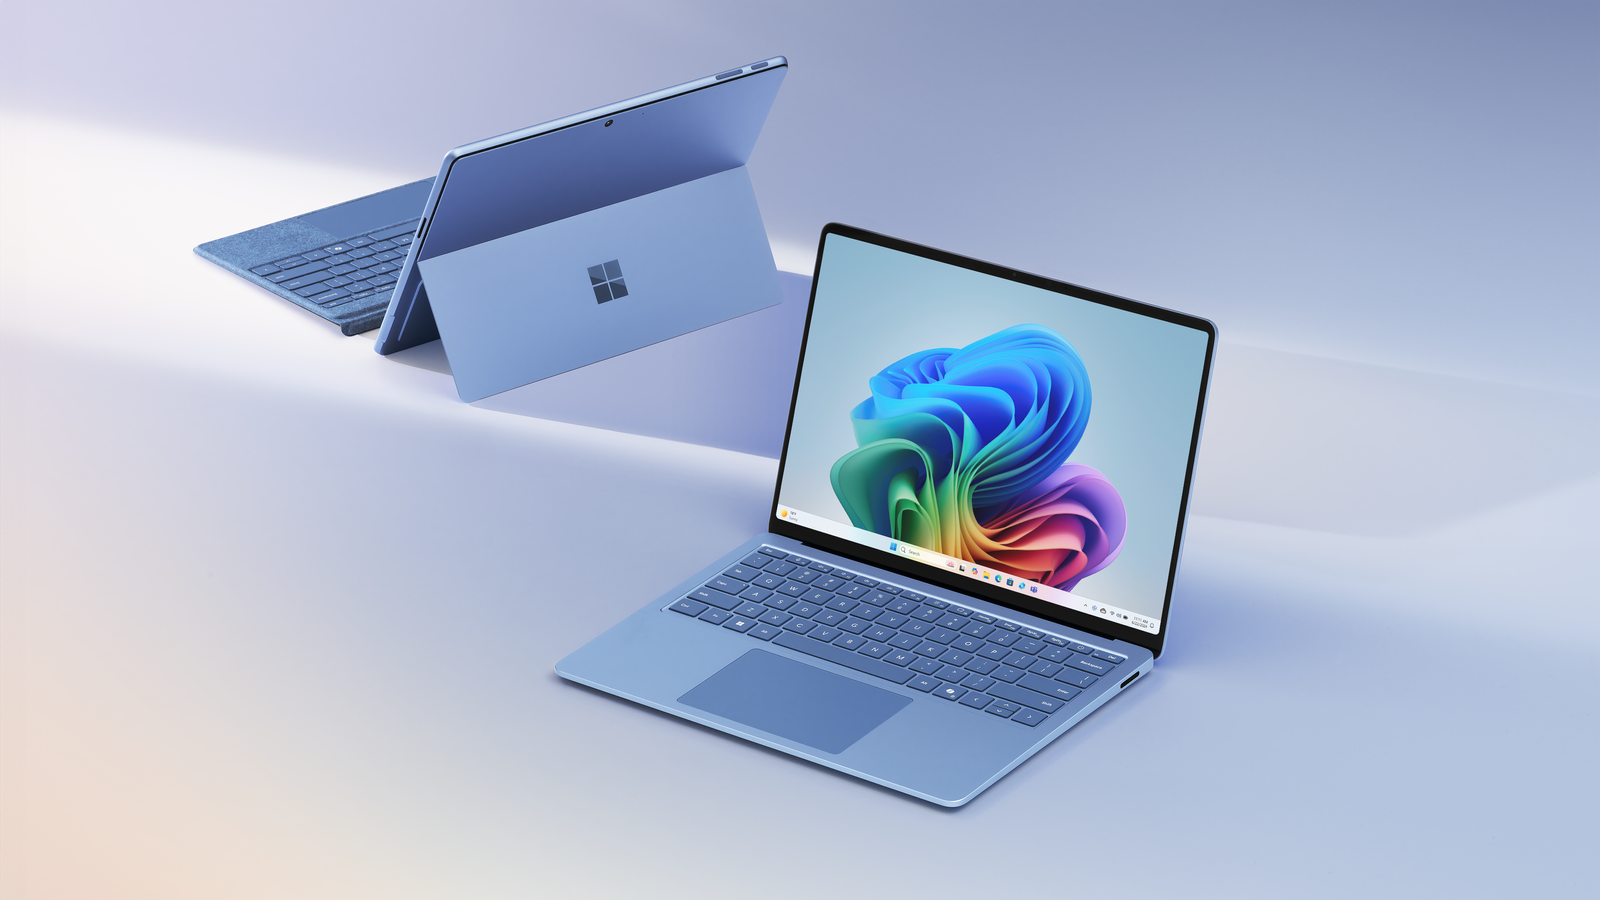 Microsoft unveils next-gen Surface Pro and Surface Laptop with AI smarts